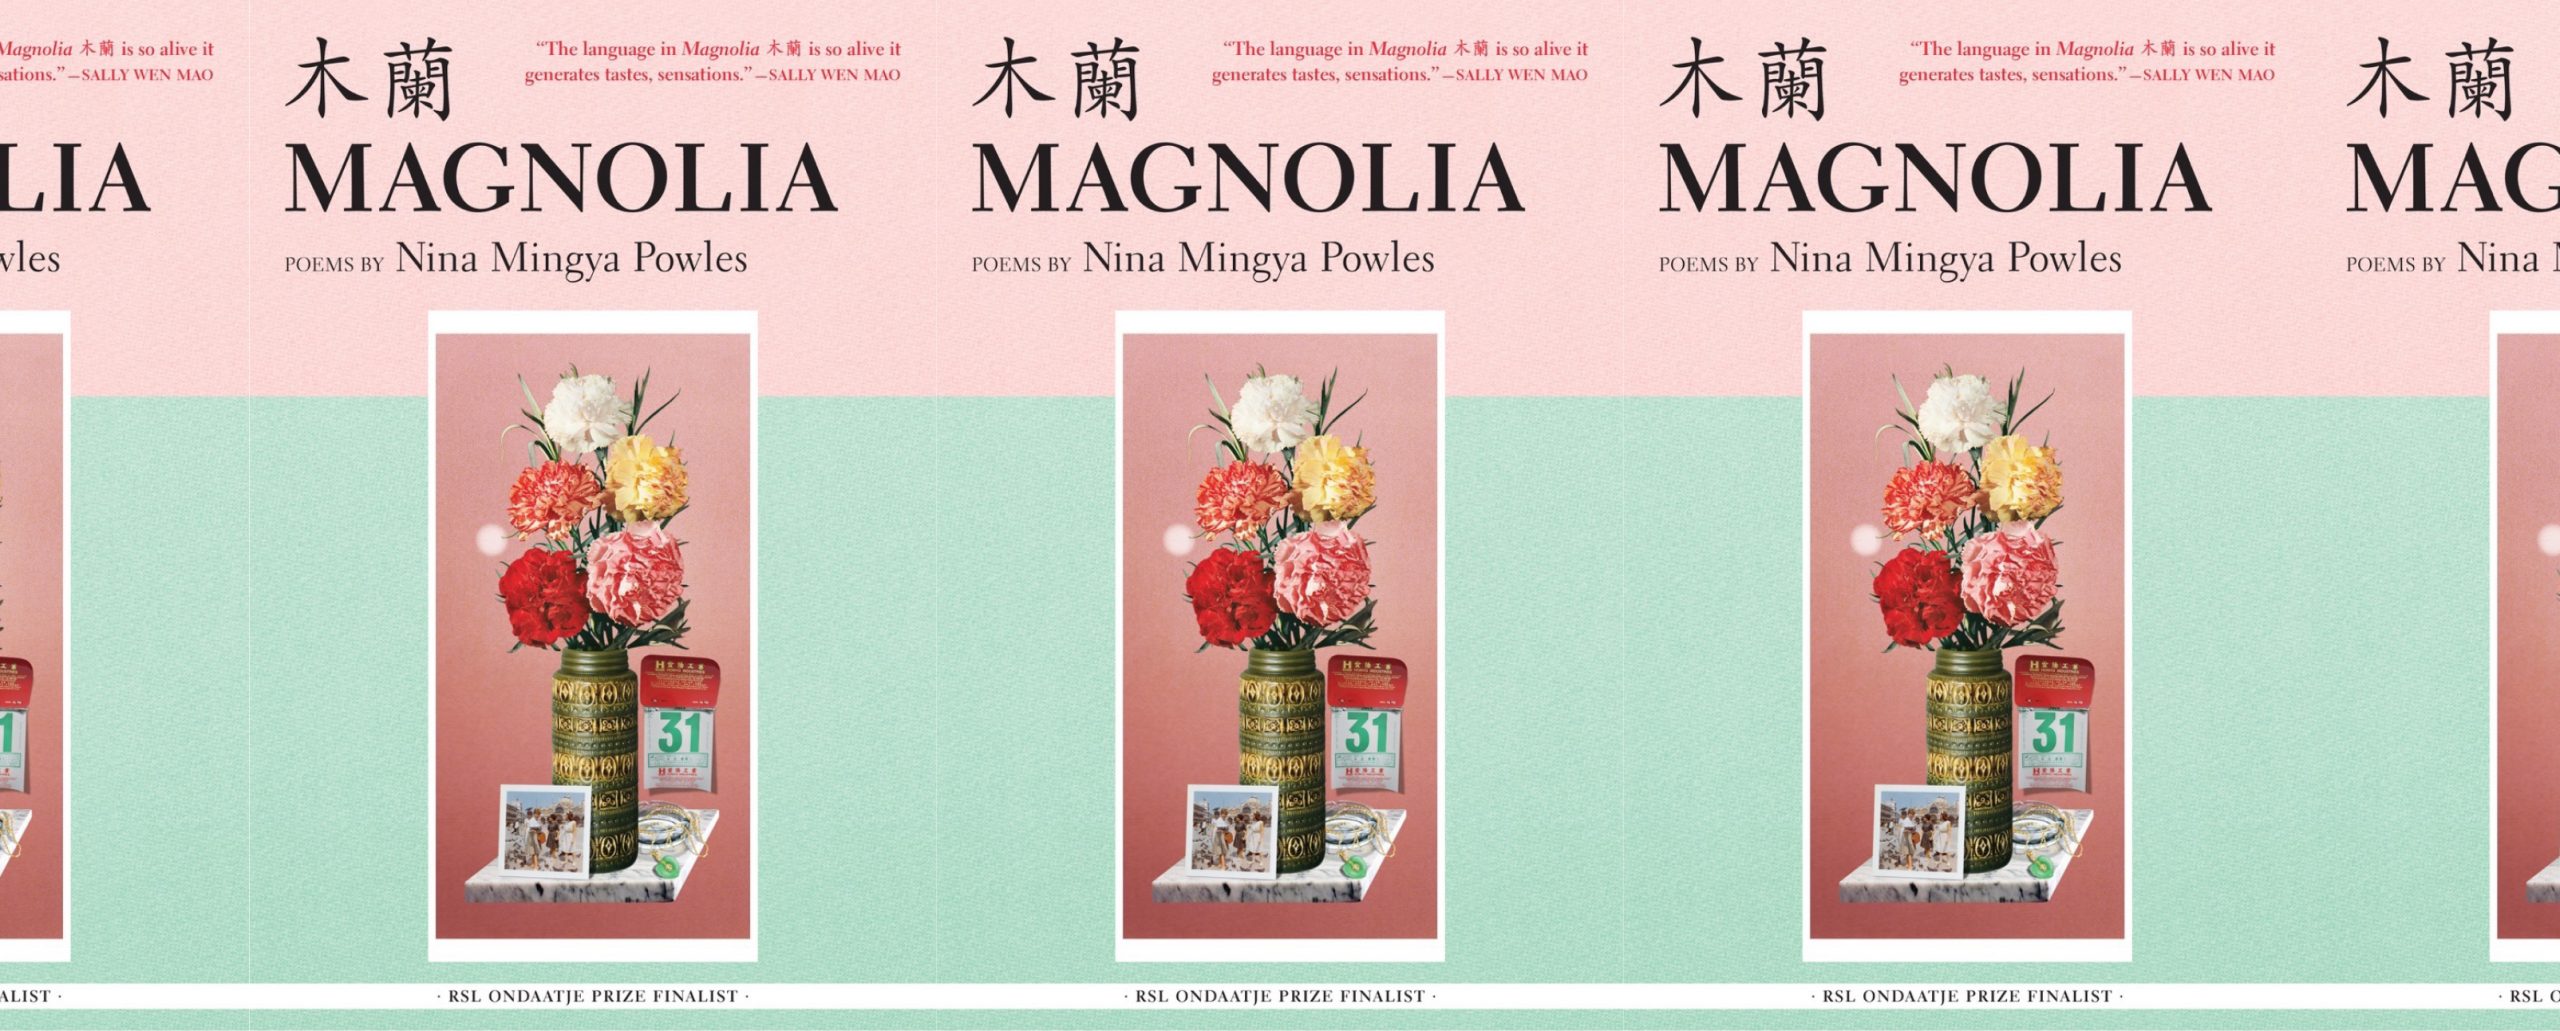 the book cover for Magnolia木蘭, featuring a painting of flowers in a vase with a calendar page, photograph, and bracelet next to it